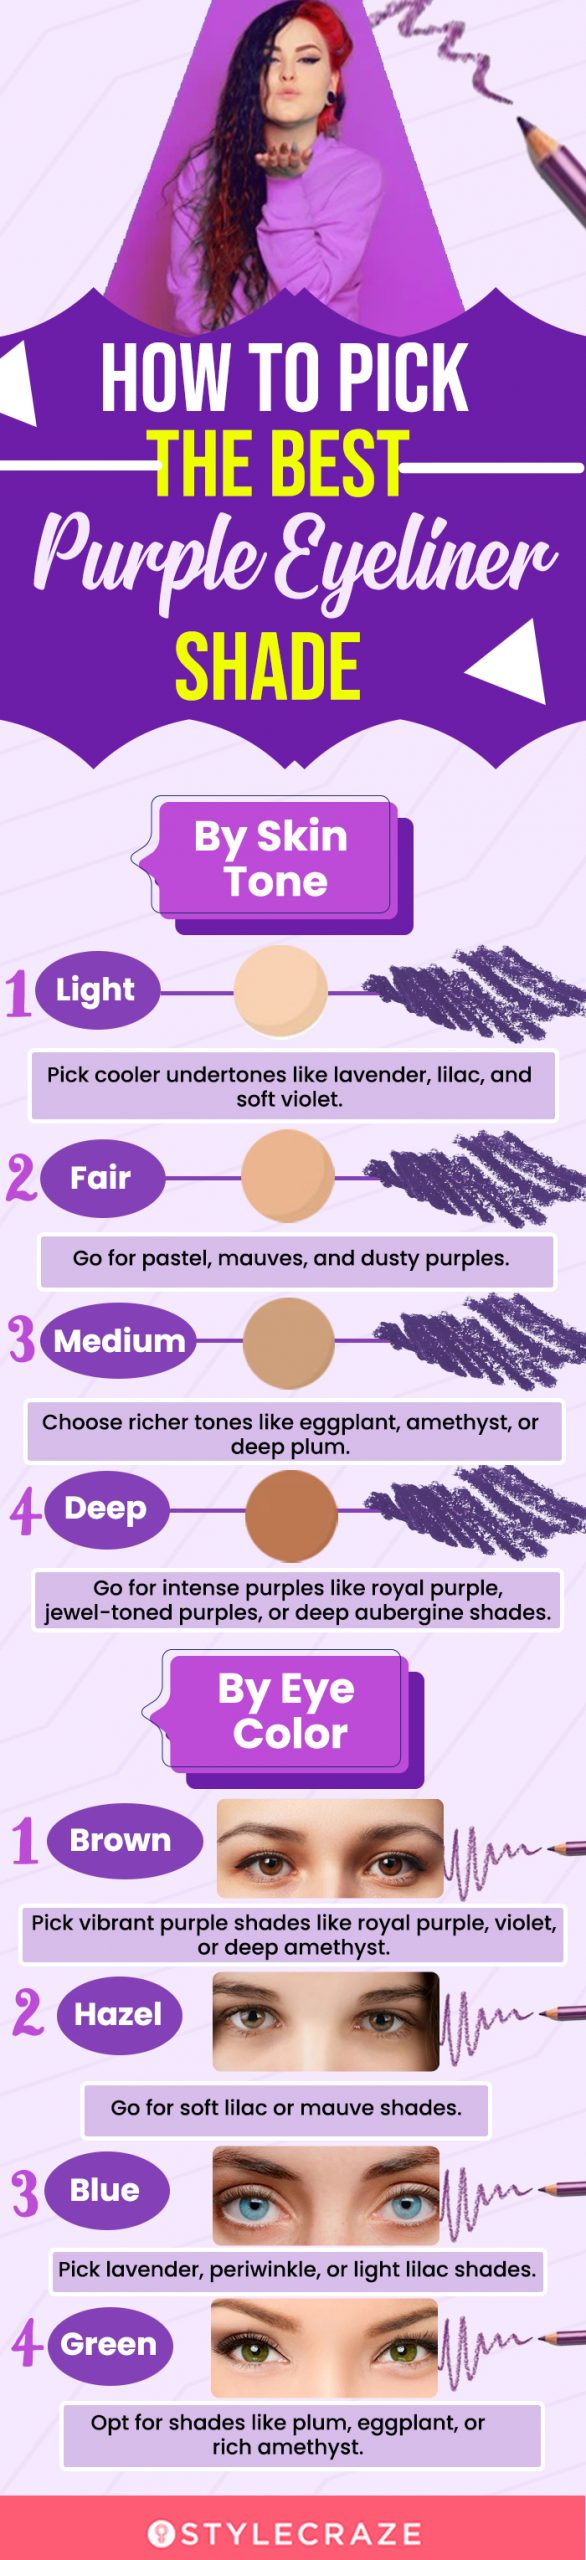 How To Pick The Best Purple Eyeliner Shade (infographic)